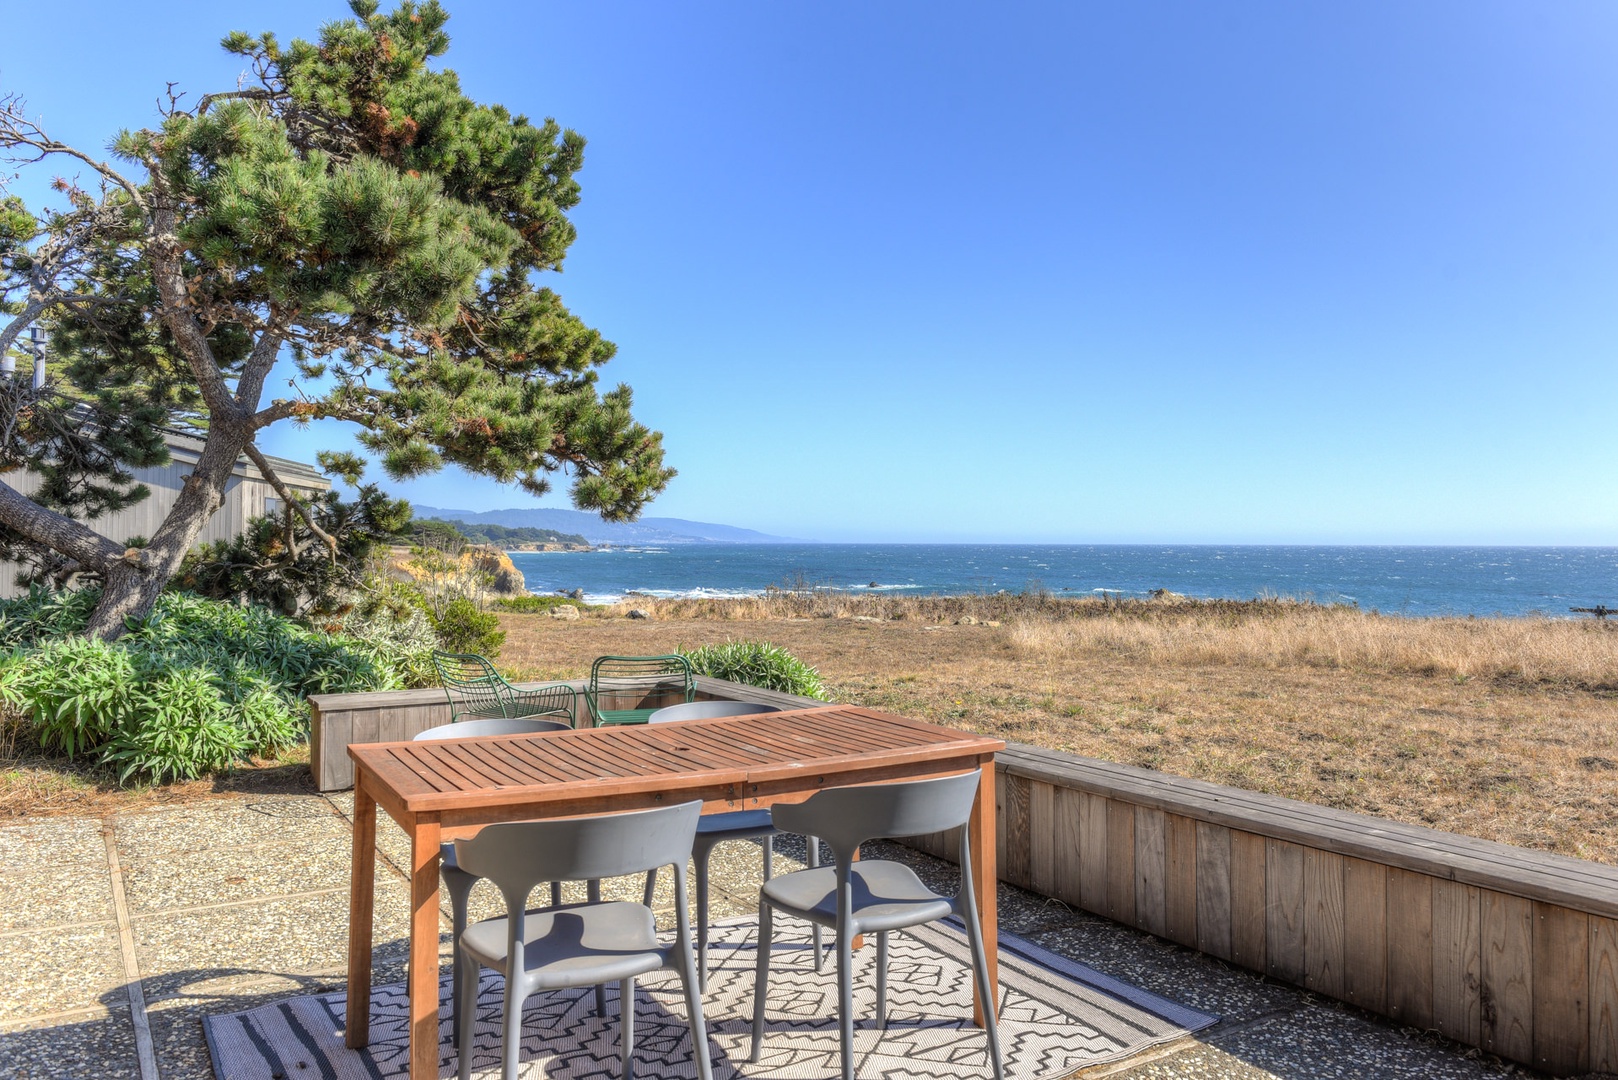 Outdoor seating for 4 with ocean views